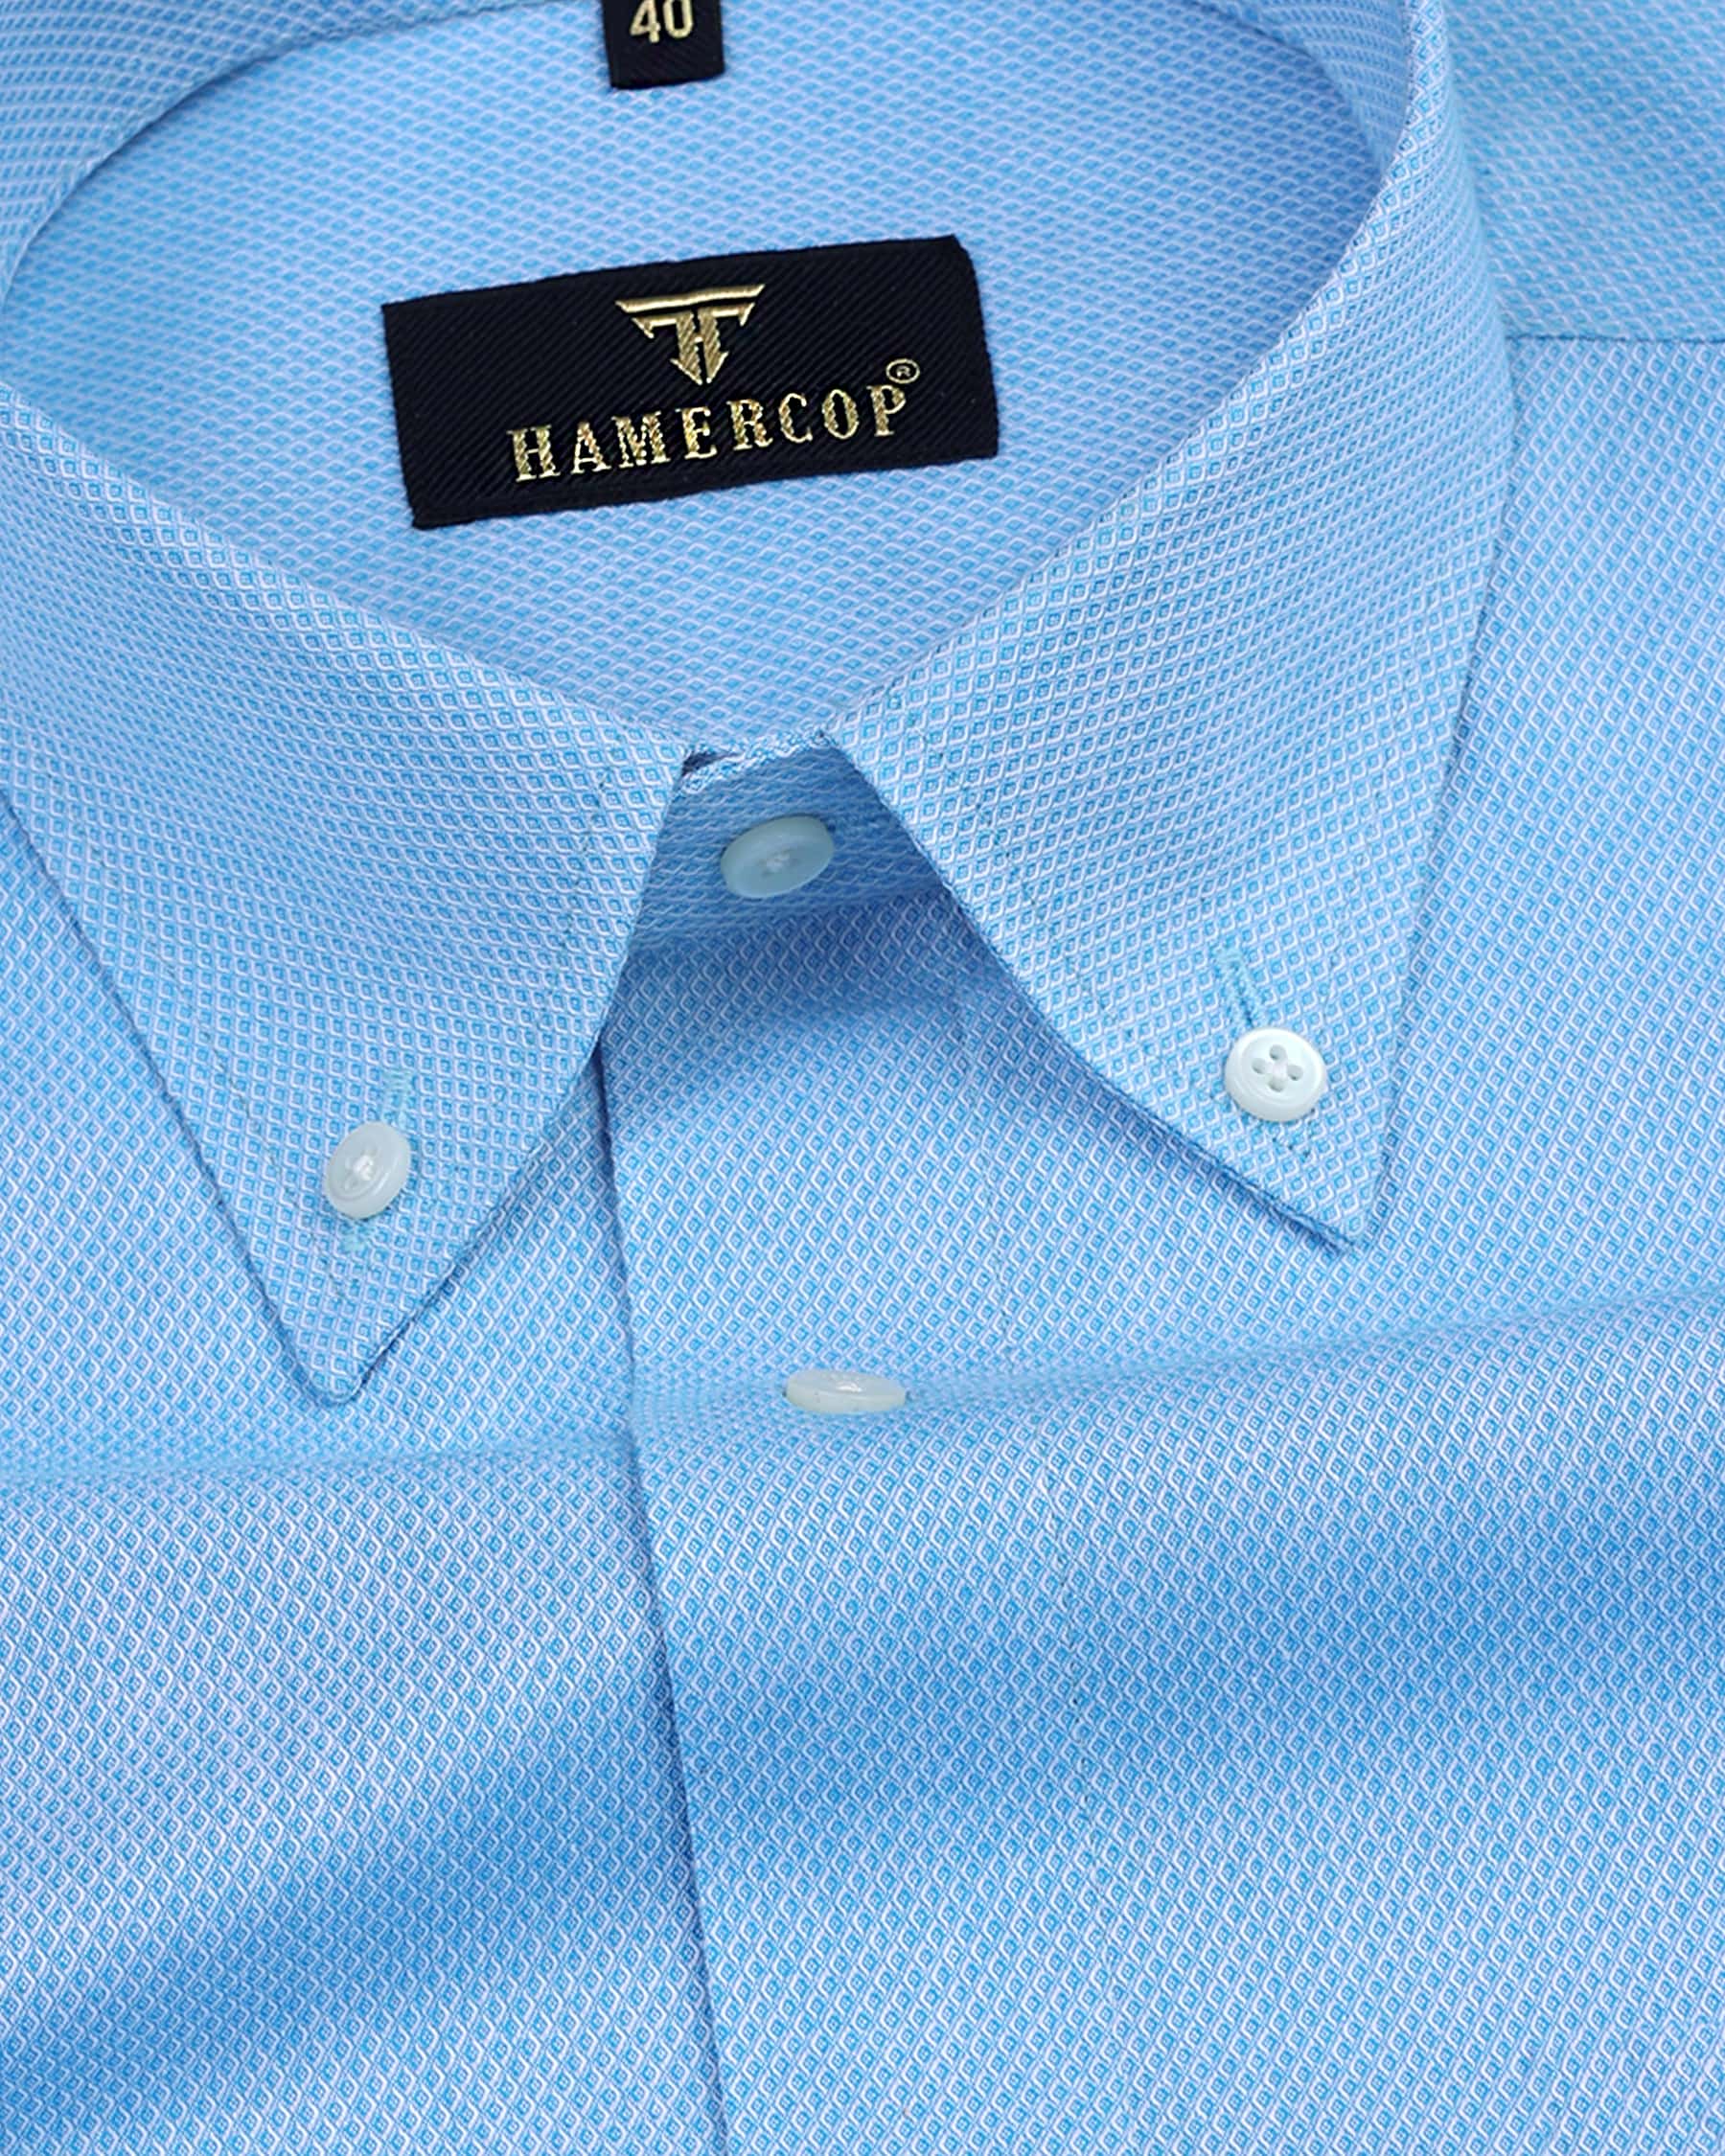 Vision SkyBlue With White Jacquard Dobby Cotton Shirt – Hamercop